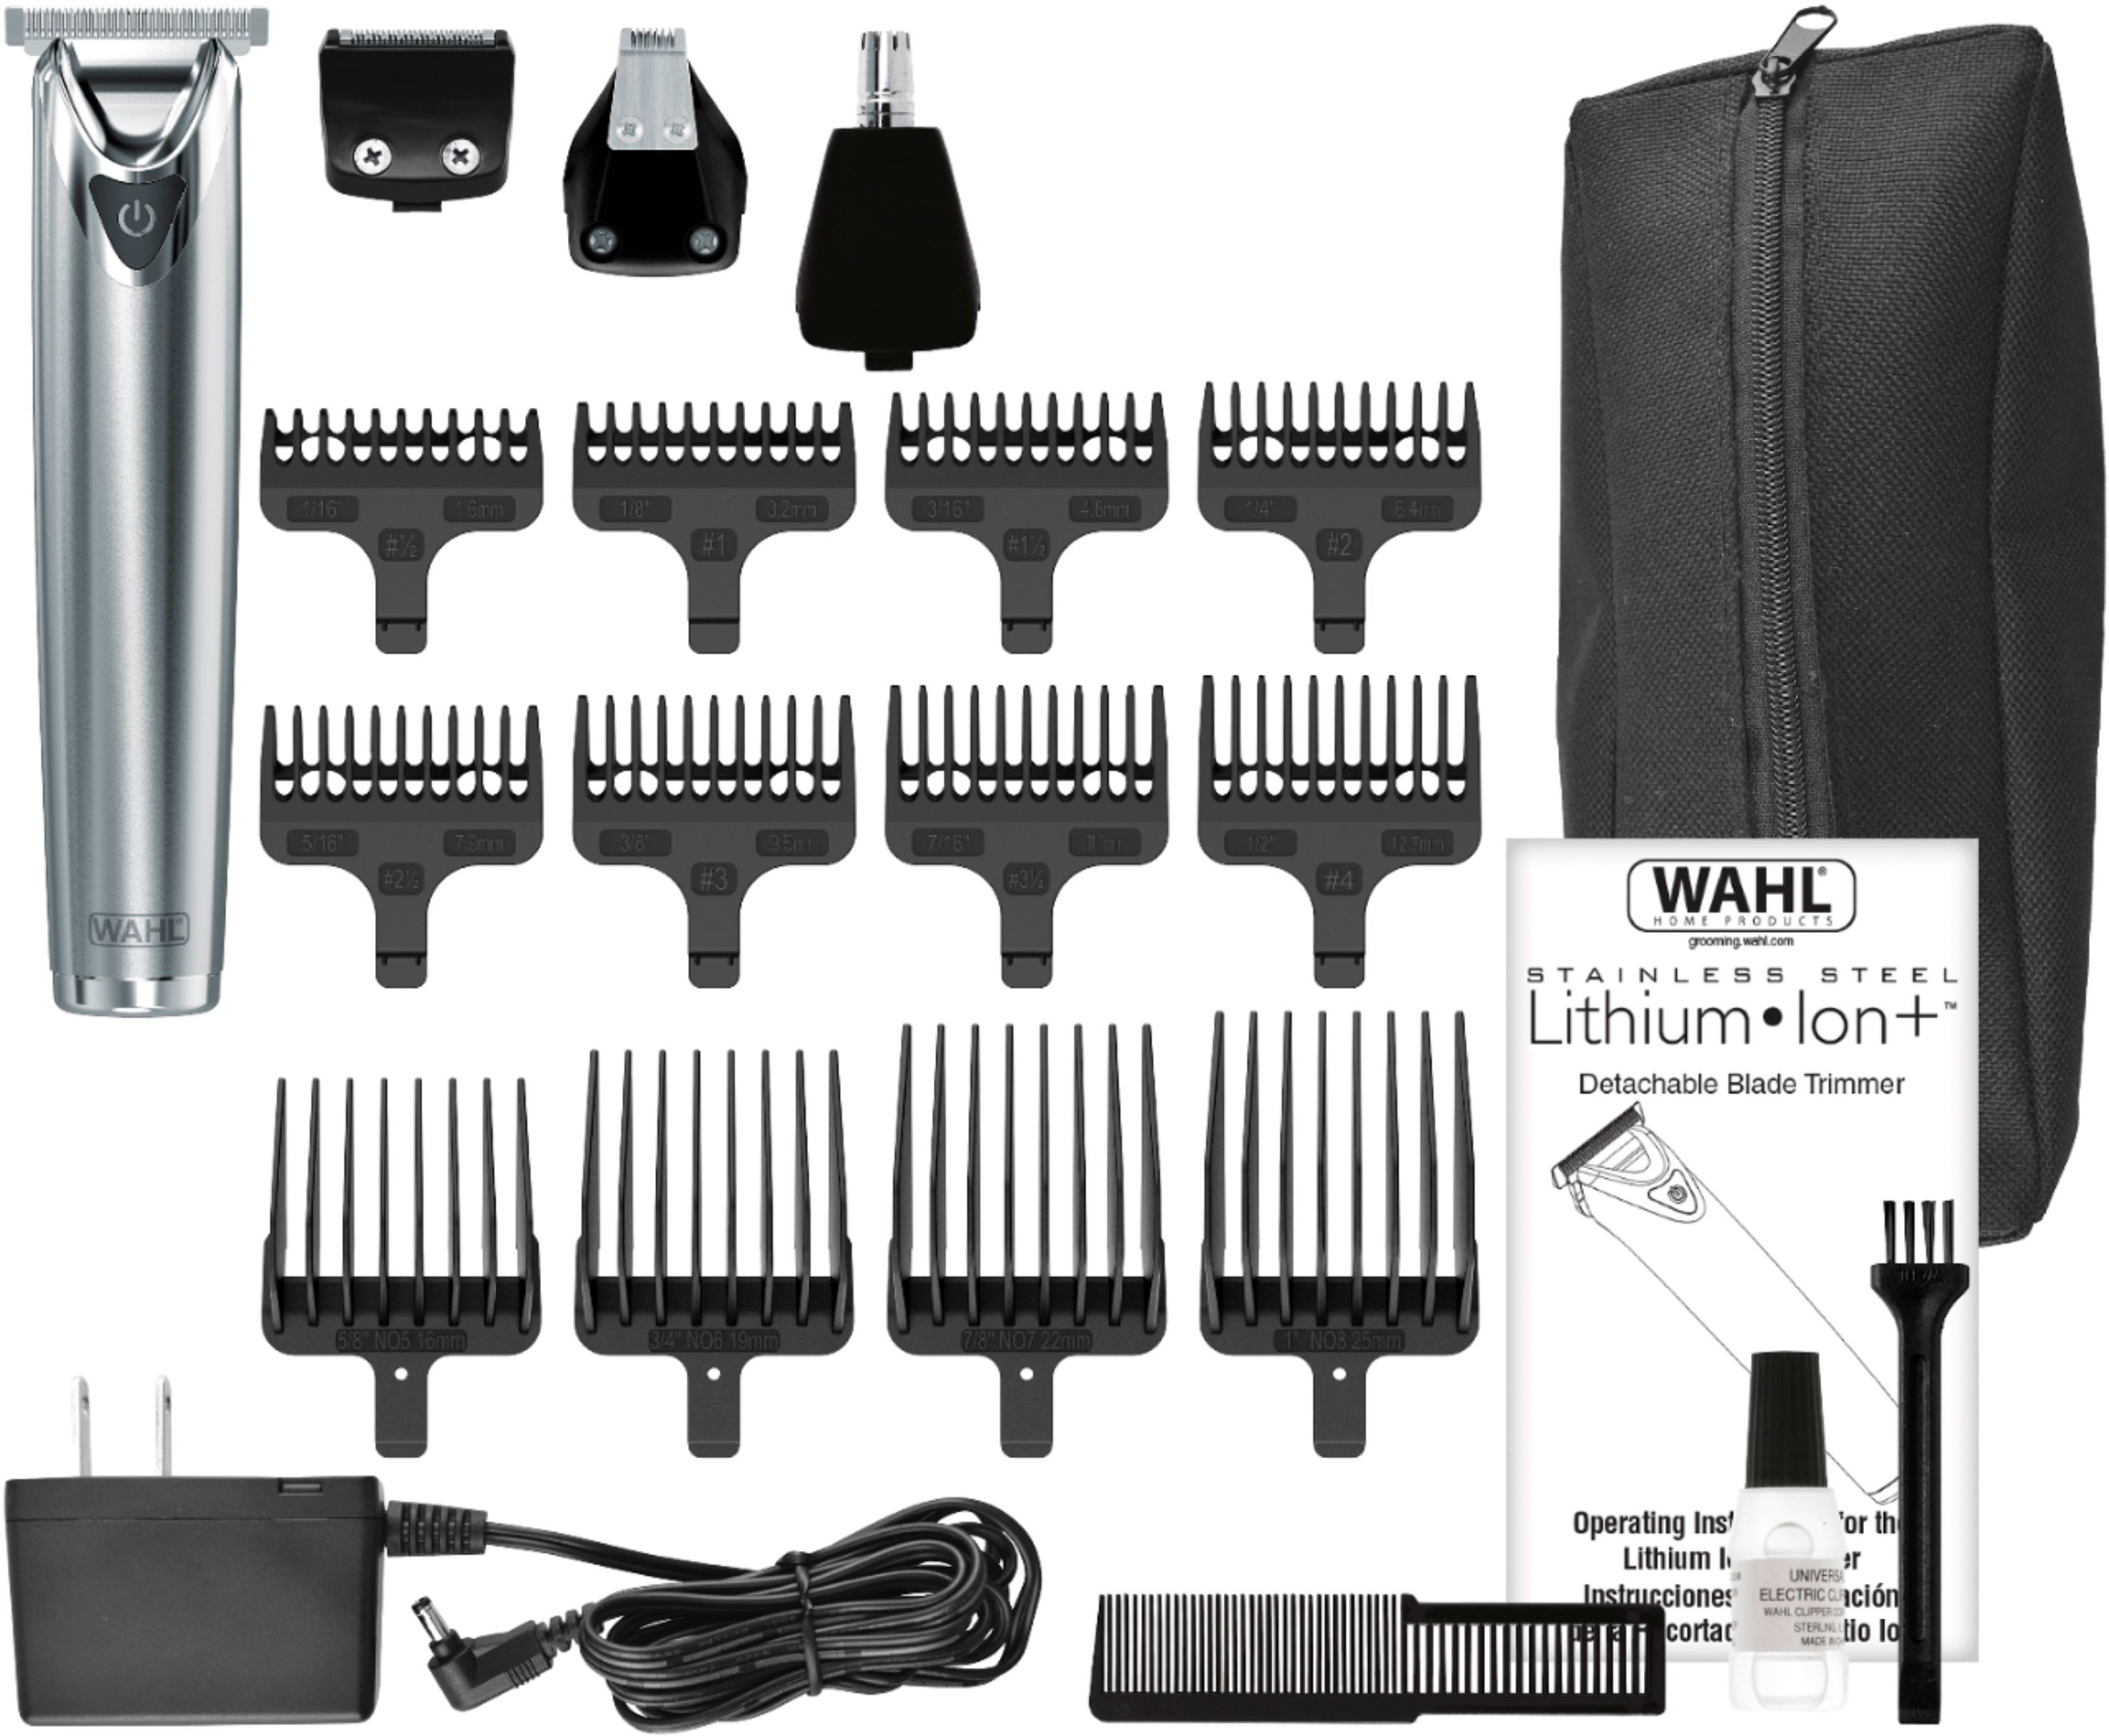 wahl stainless lithium